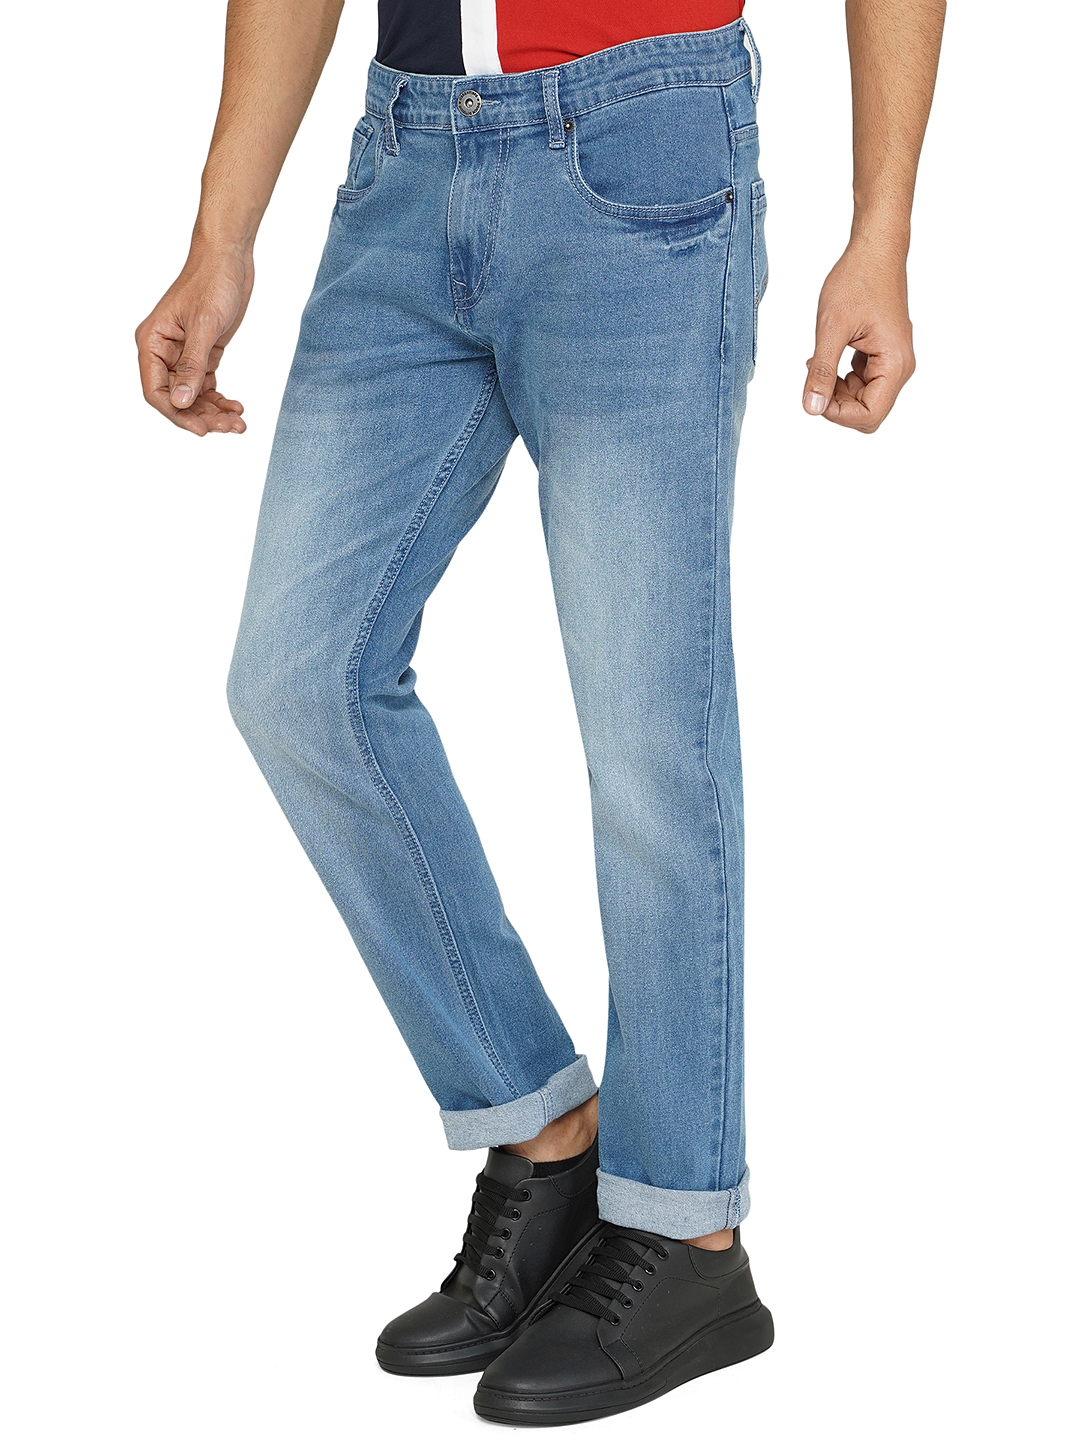 Greenfibre | Blue Washed Straight Fit Jeans | Greenfibre 1